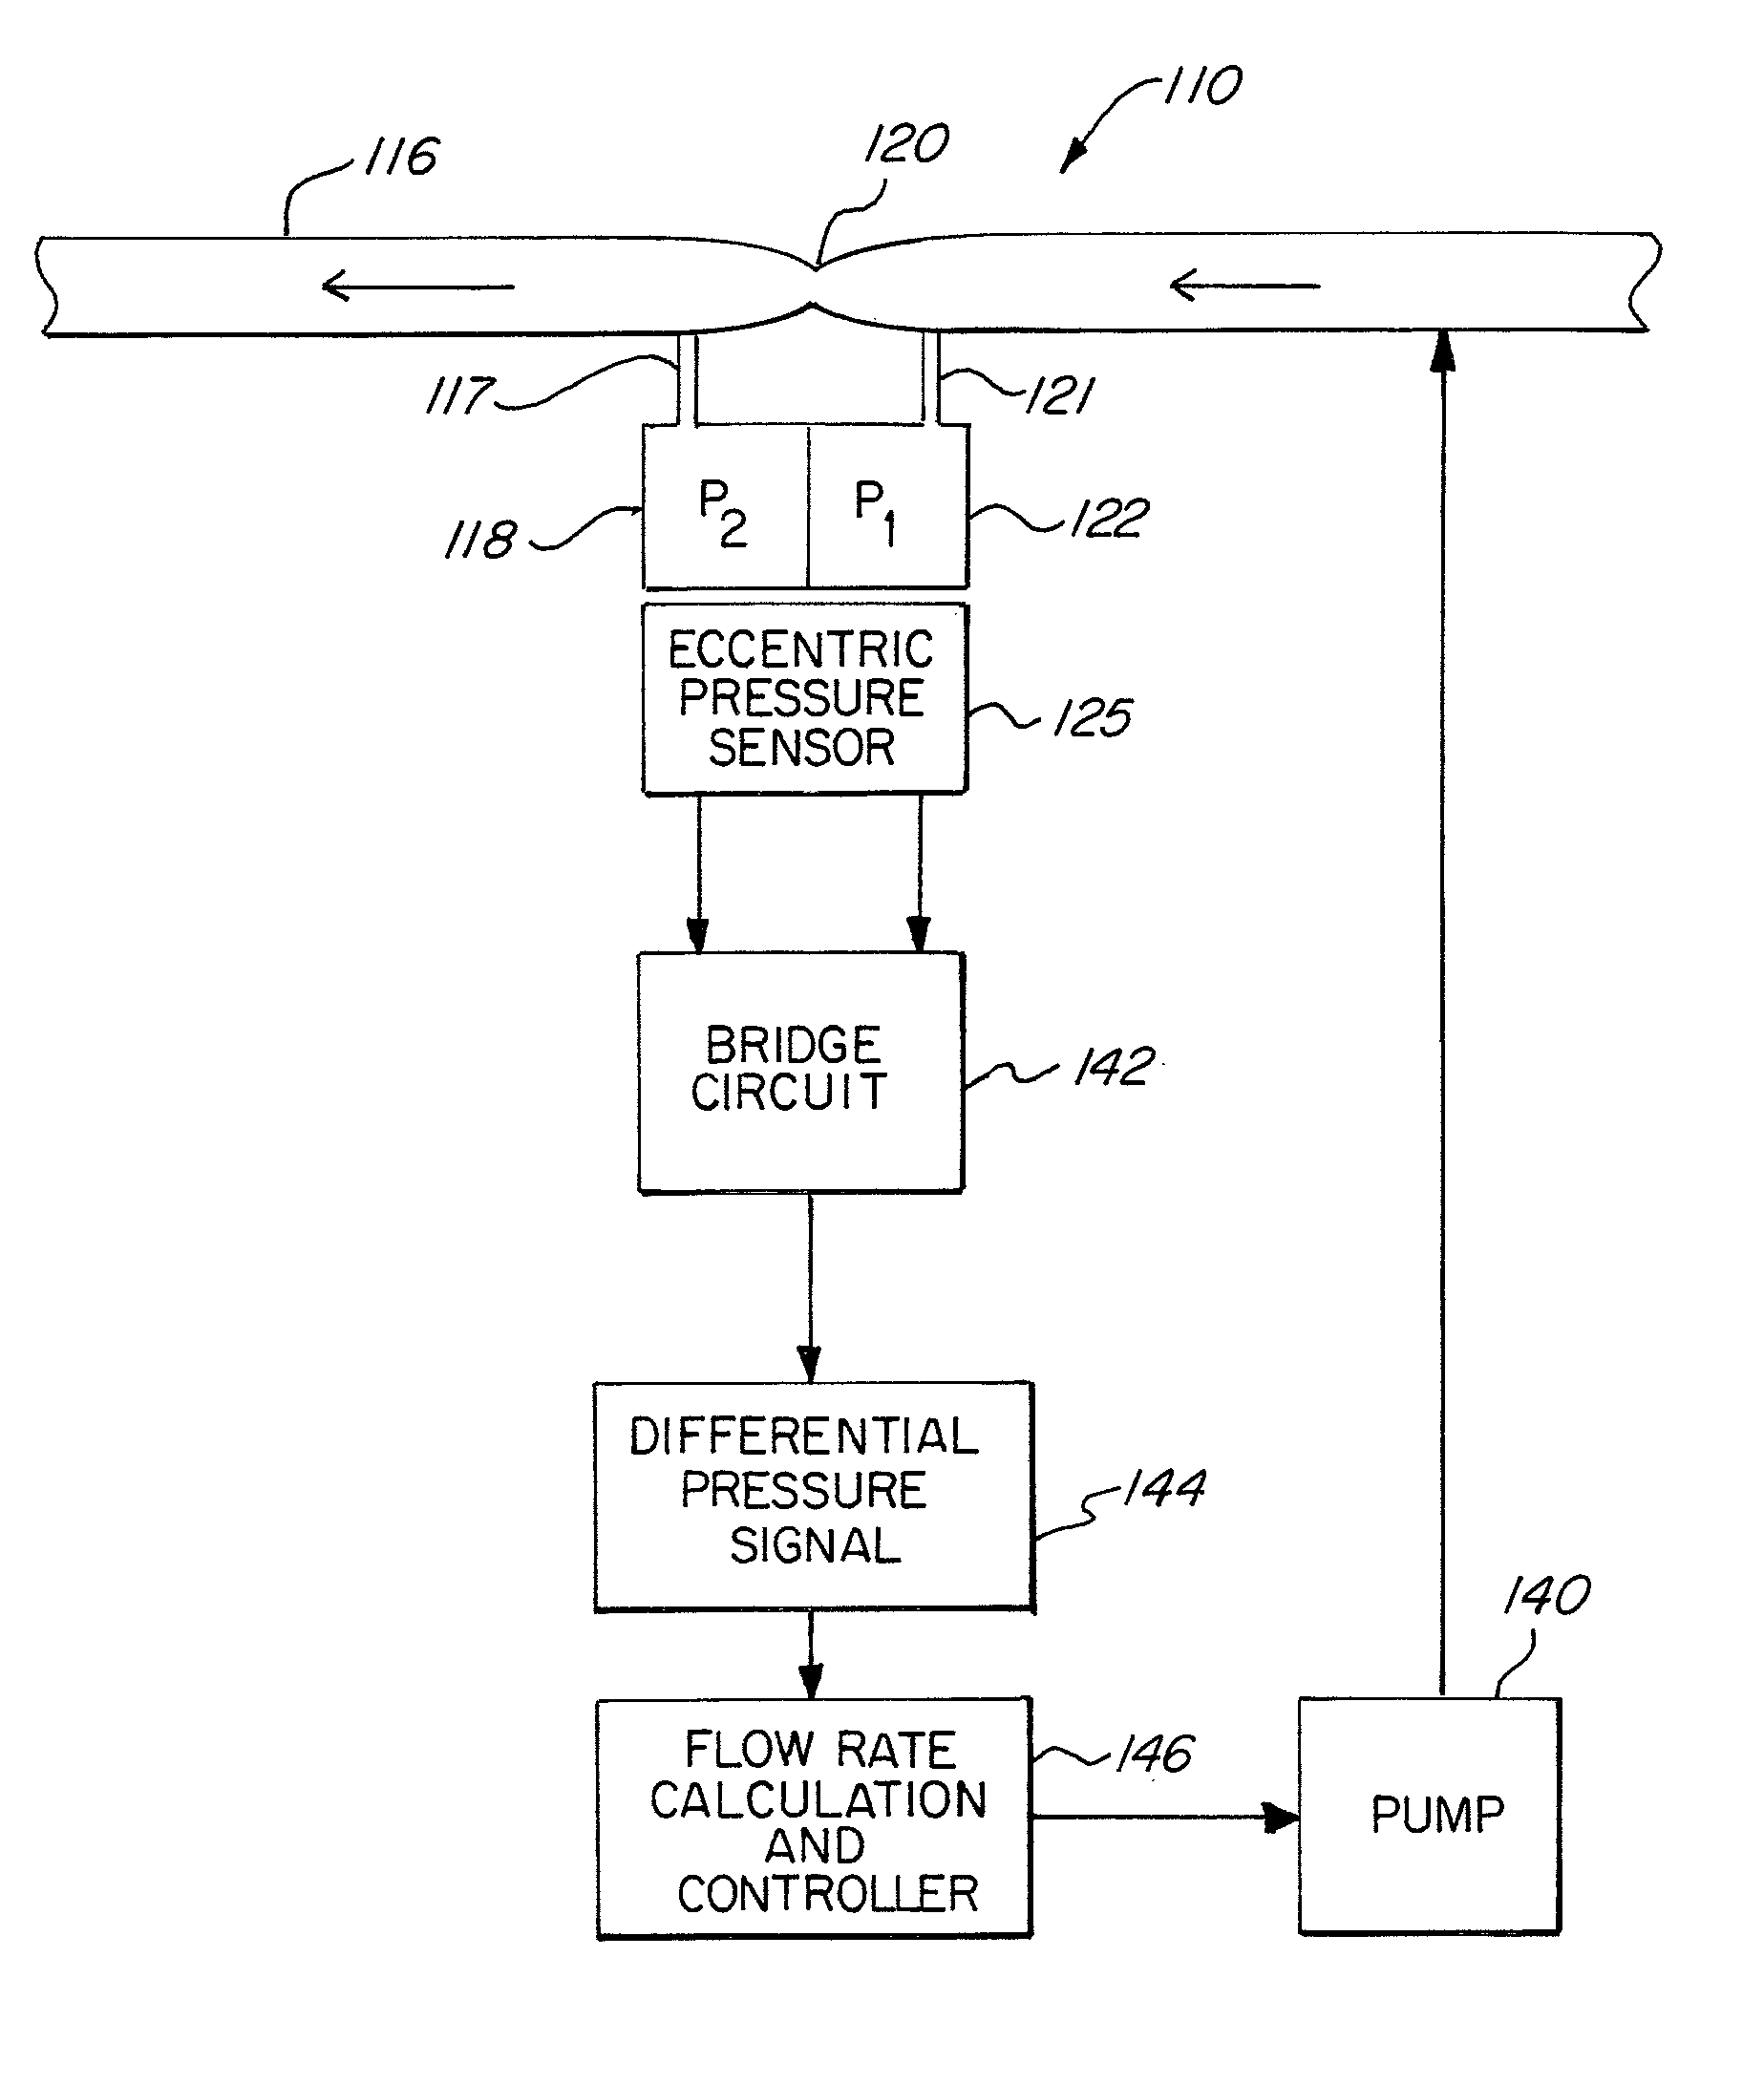 Eccentric load sensing device used to sense differential pressures